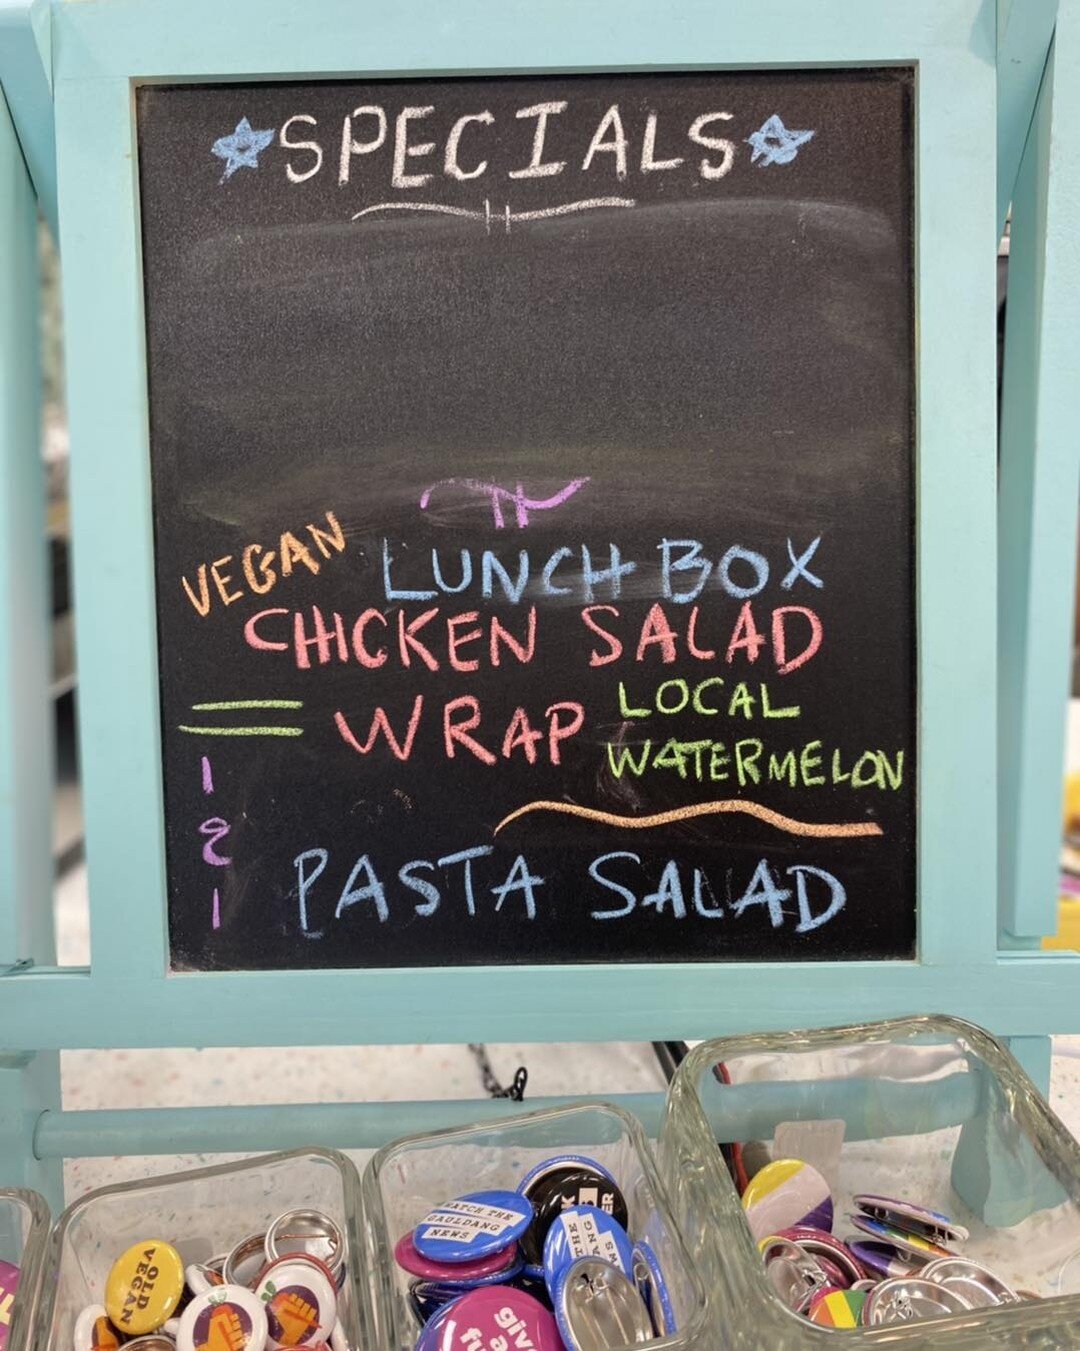 Come on in to Main Squeeze this week for our grab and go meals! This week we have&hellip;.. (while supplies lasts)

Hot Case:
&gt;Chicken Philly Sandwich
&gt;Breakfast Burrito
&gt;Vegan Breakfast Burrito
&gt;Black Bean Sweet Potato Burritos

Fridge:
